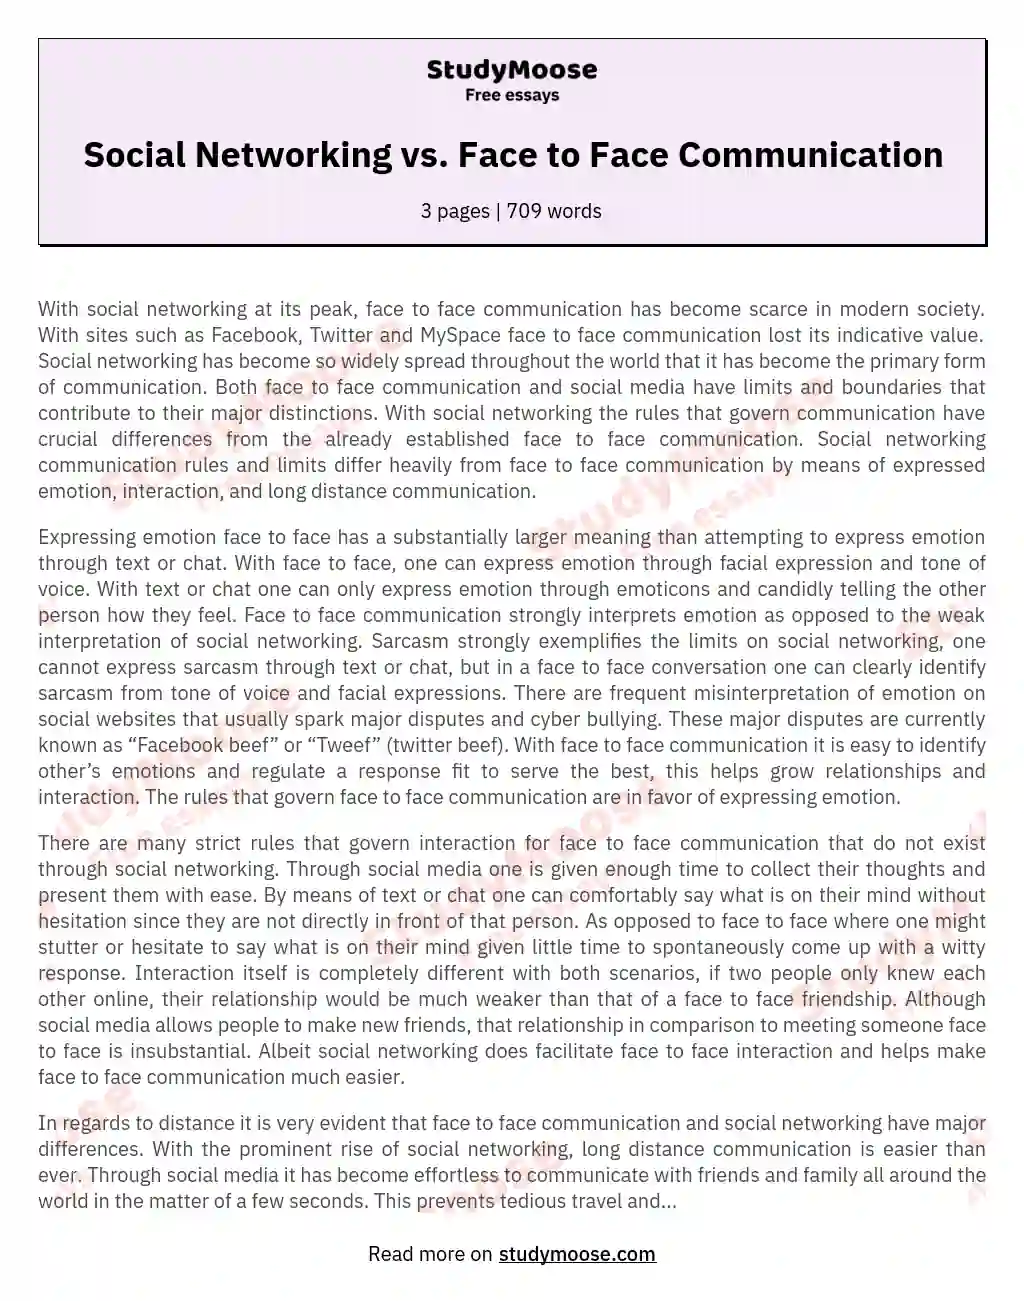 Social Networking vs. Face to Face Communication essay